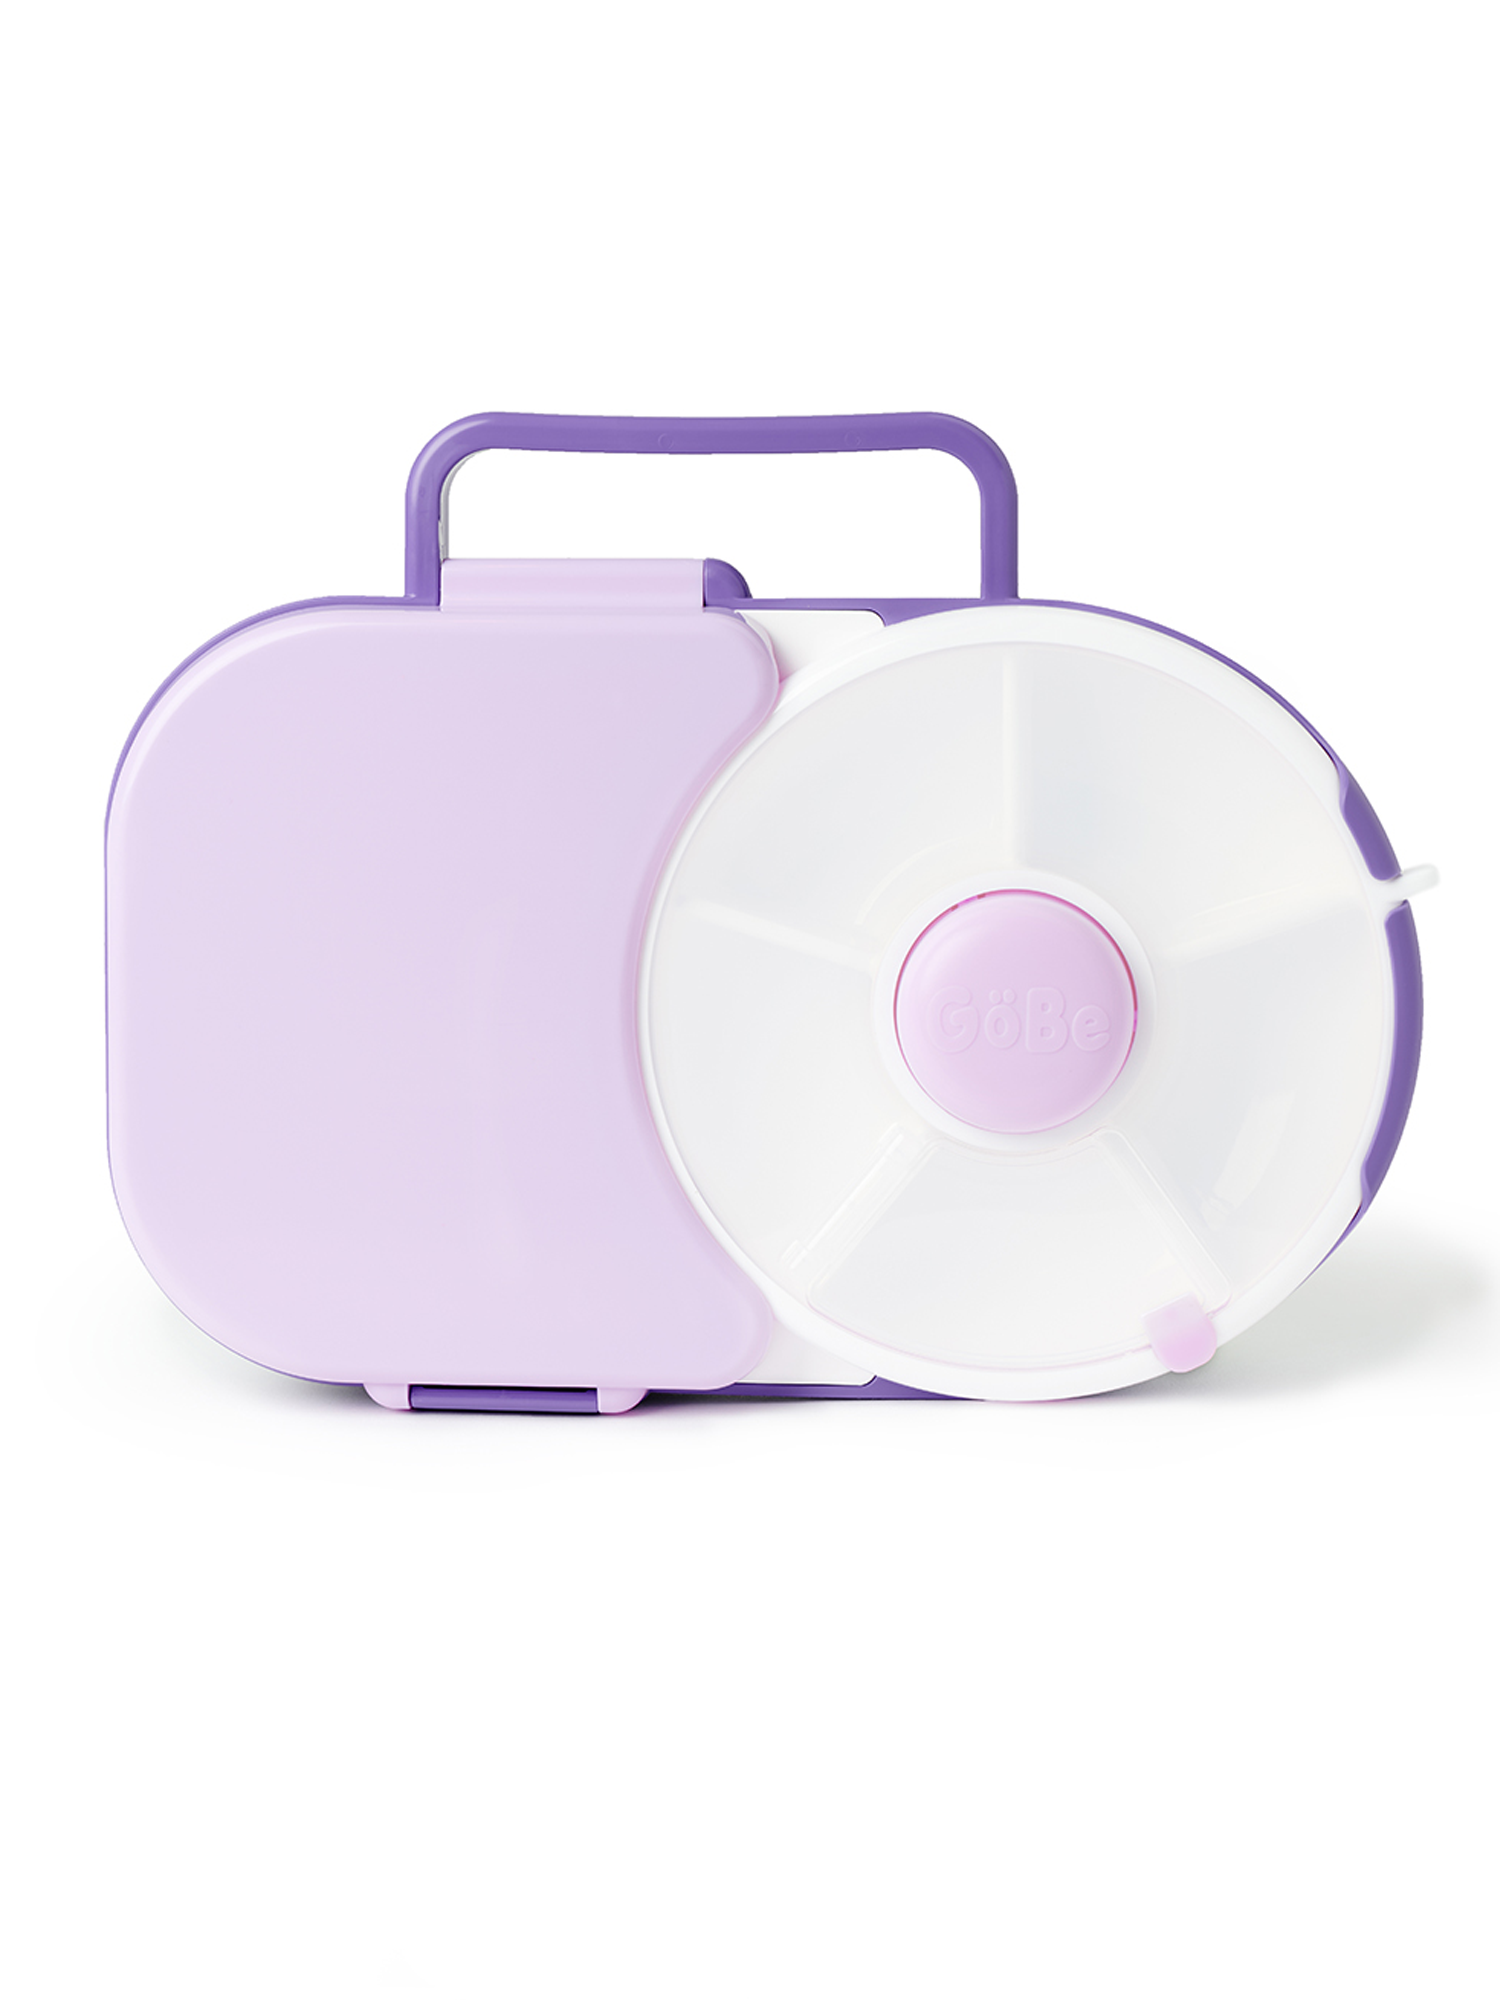 GoBe Kids Snack Spinner - Reusable … curated on LTK